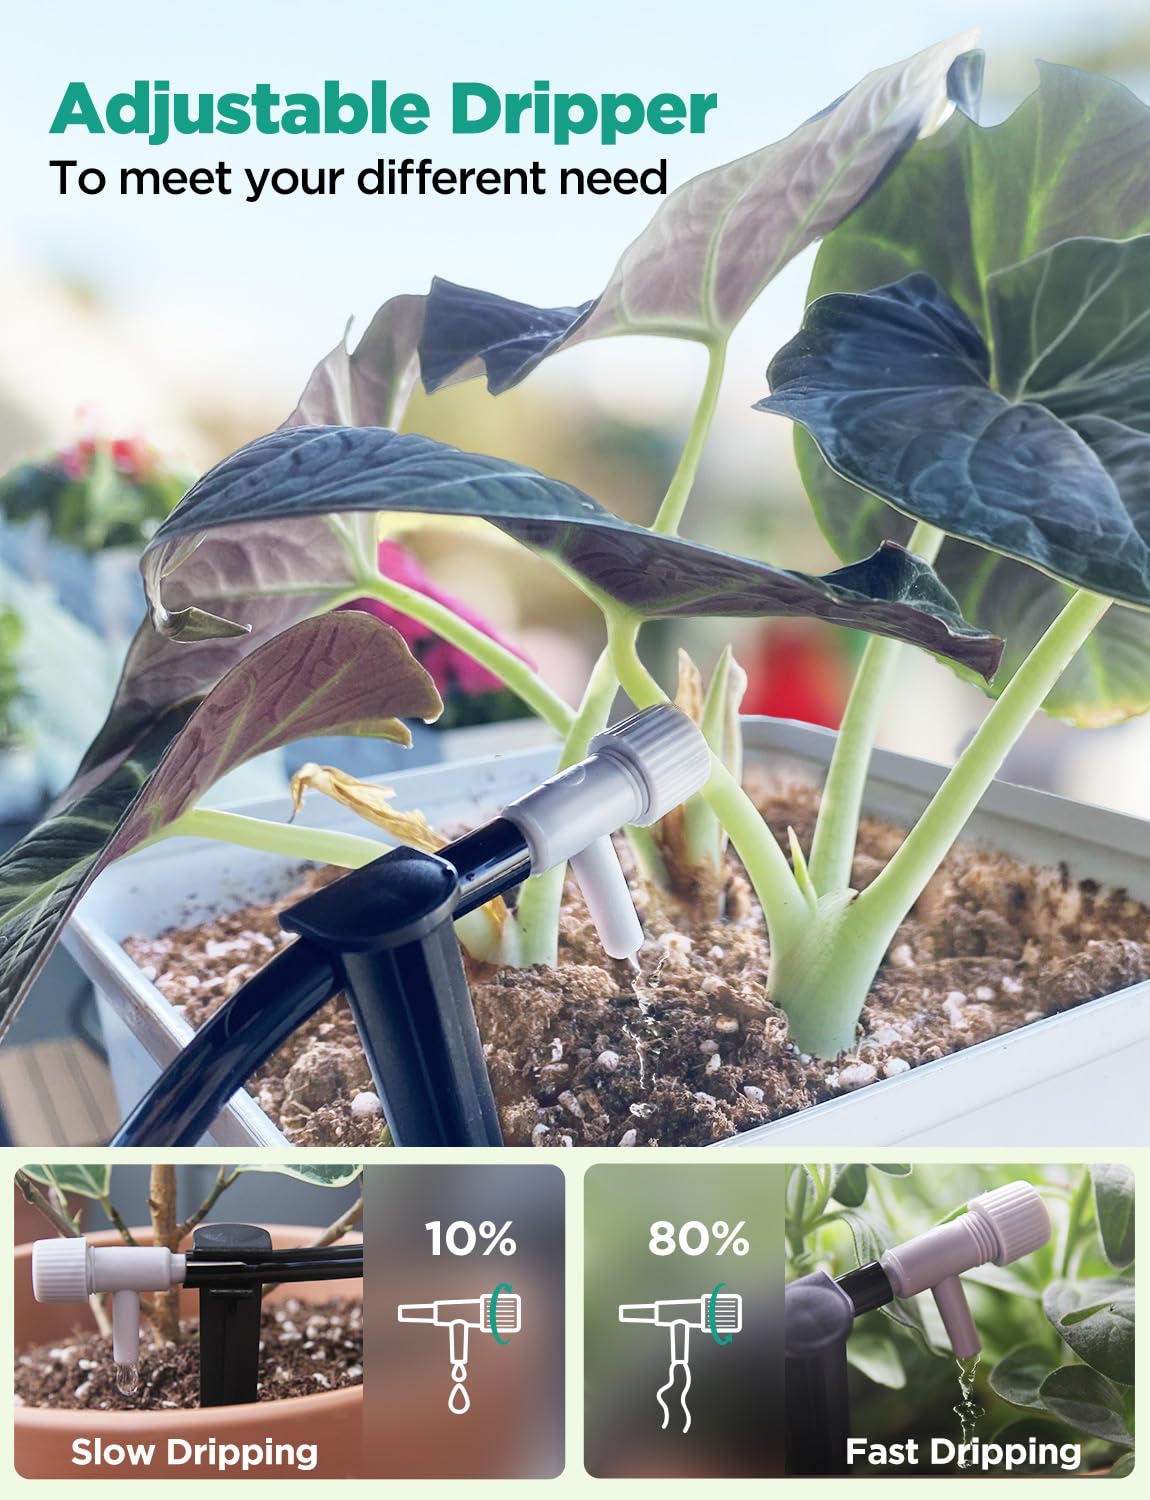 LetPot Automatic Watering System